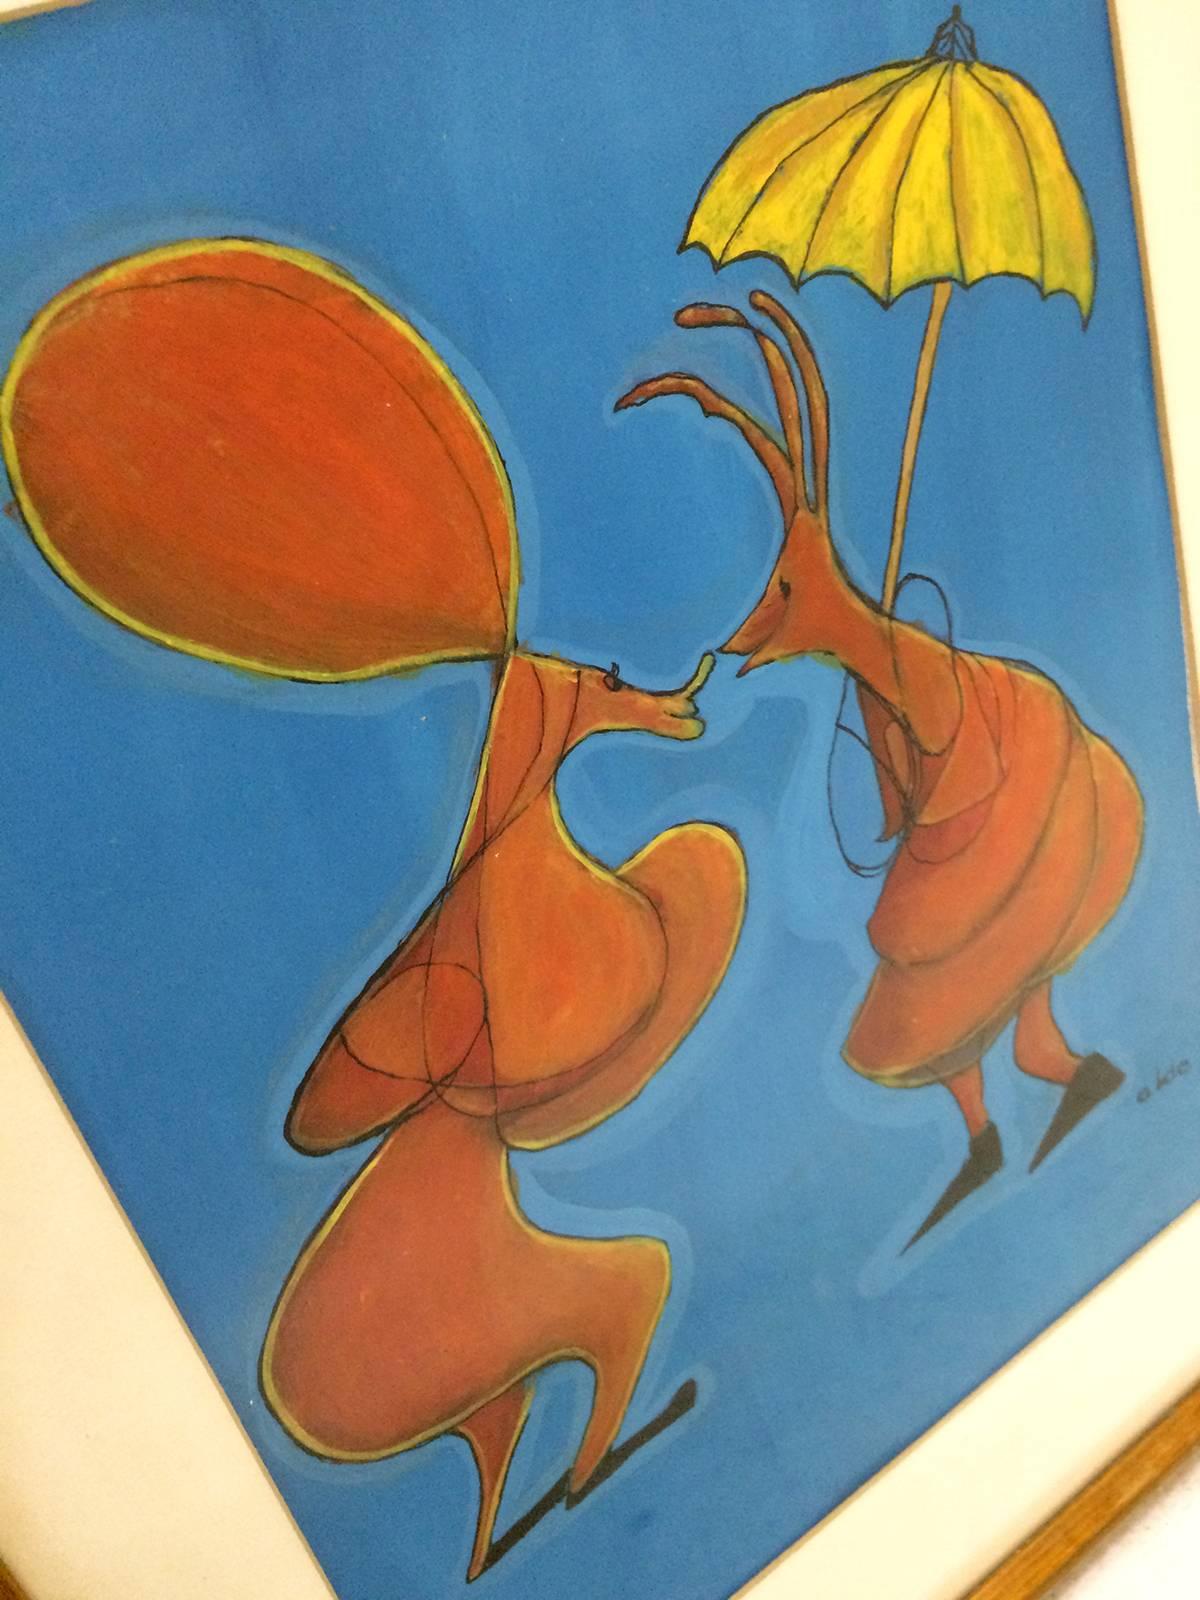 American Playful Caricatures of a Loving Couple, Signed Aldo